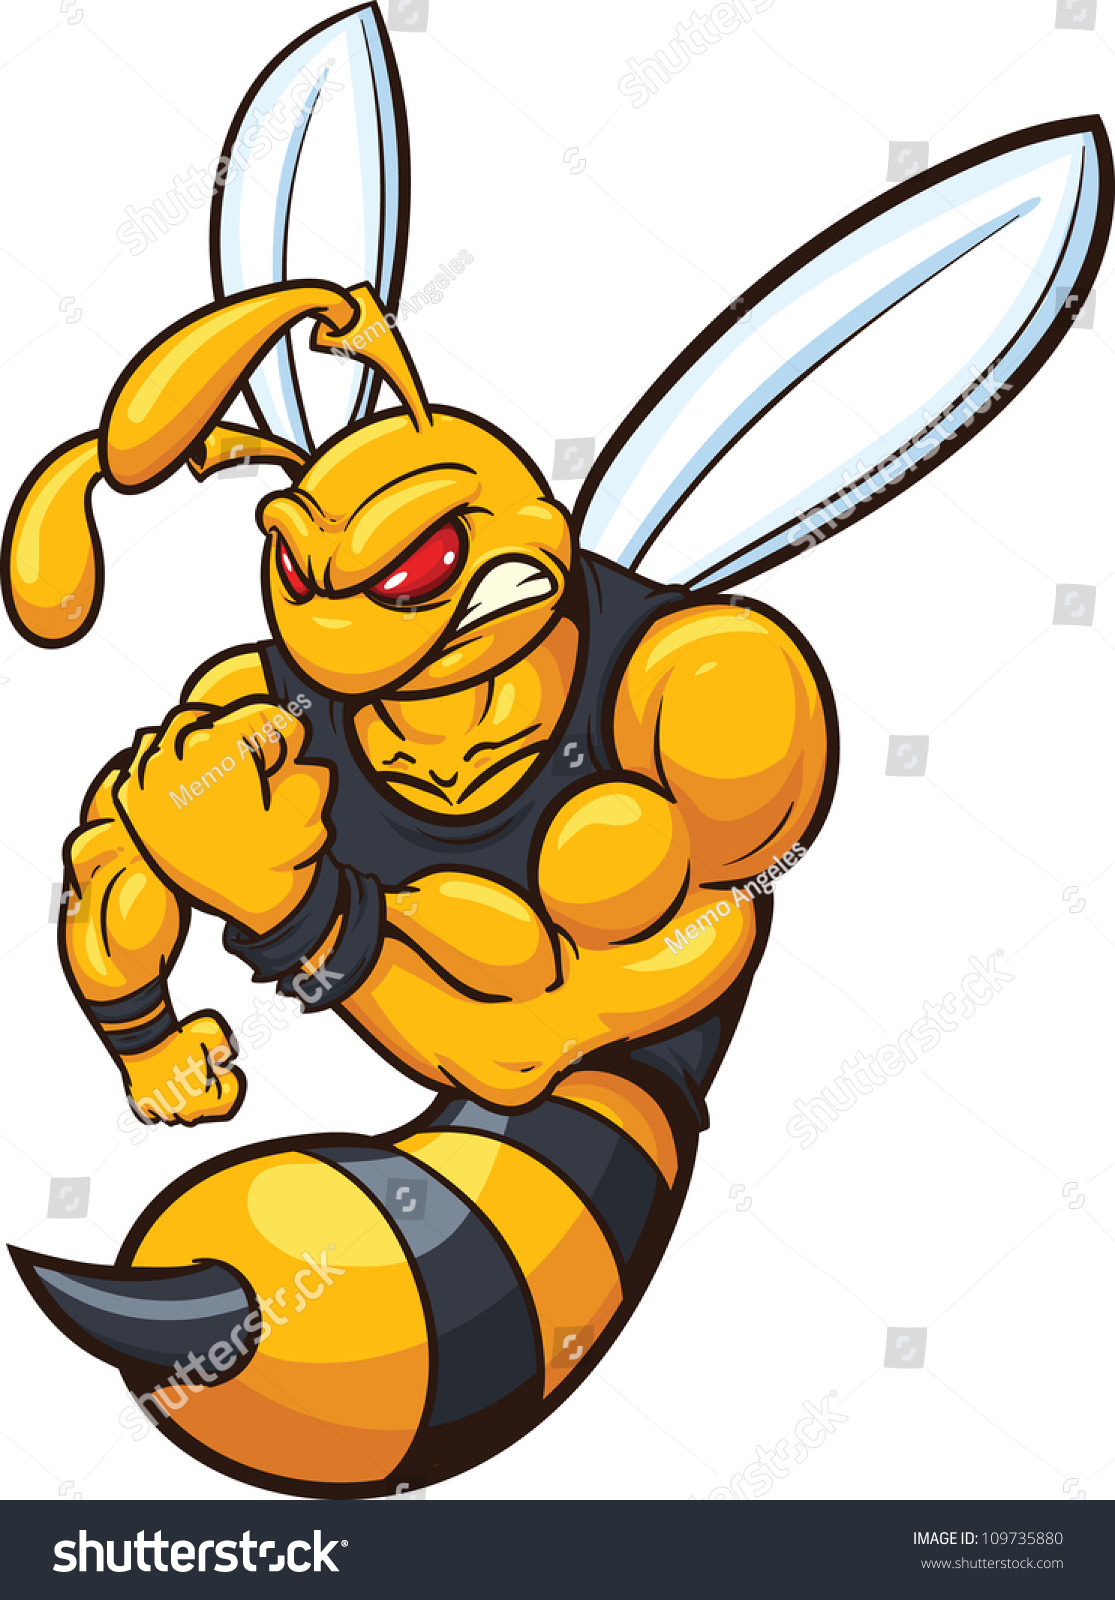 SVG of Yellow jacket mascot. Vector illustration with simple gradients. All in a single layer. svg